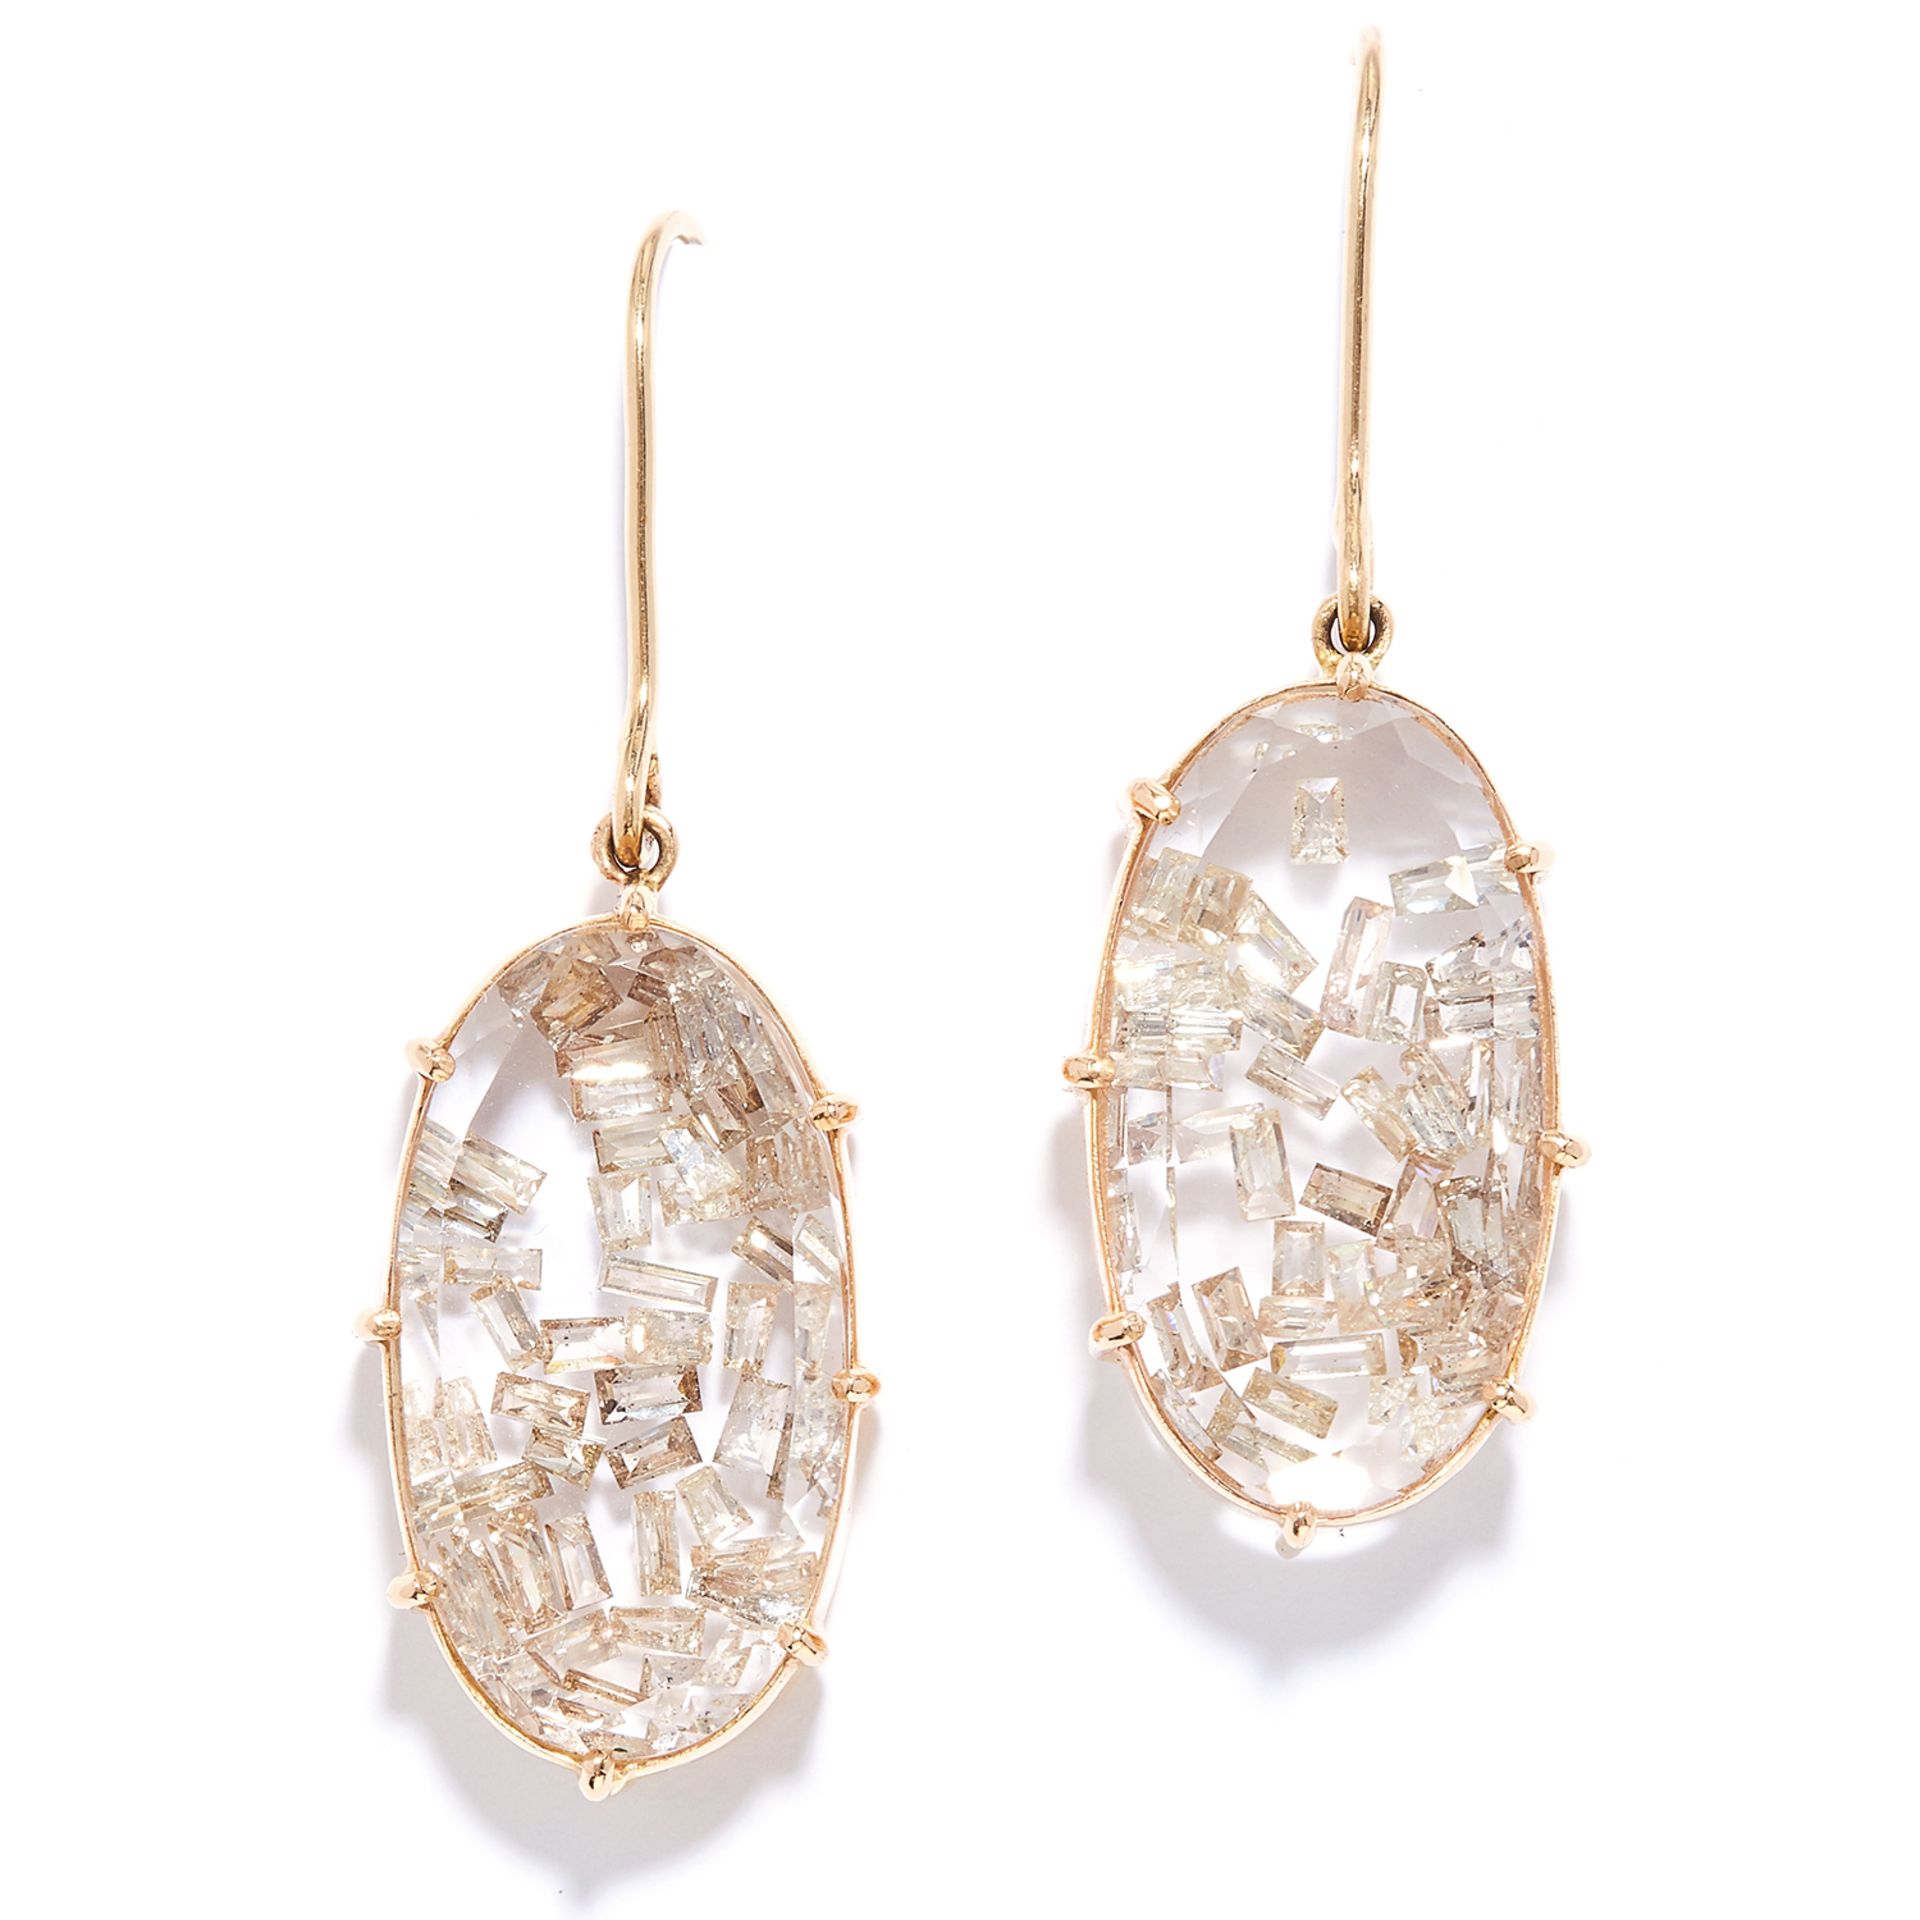 DIAMOND AND ROCK CRYSTAL EARRINGS in yellow gold, comprising of two polished rock crystal pieces